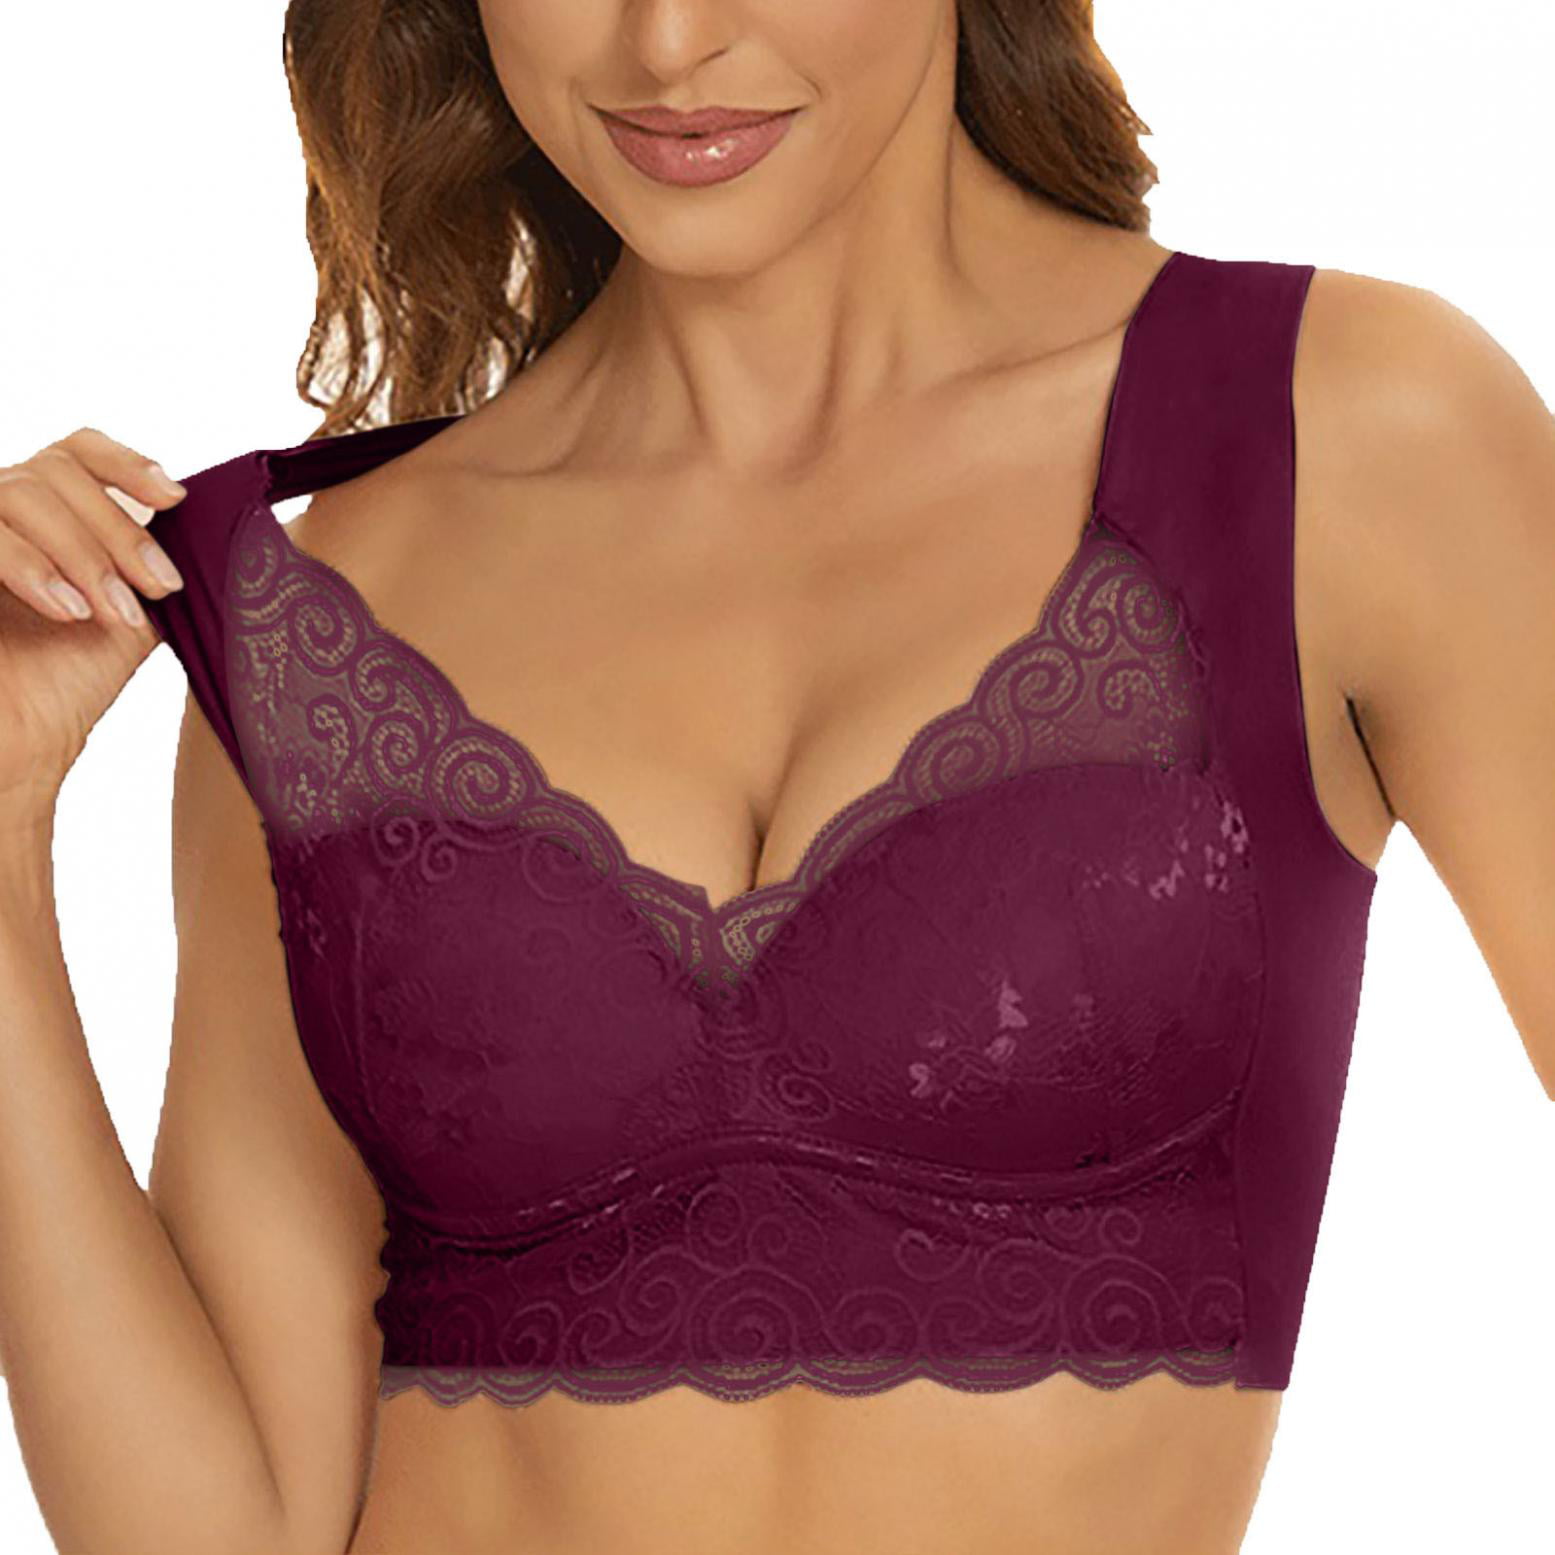 Push up Bra for Women Plus Size Lace Bras Underwire Brassiere - Comfort Fit  Full Coverage Bra for Everyday Wear(3-Packs)